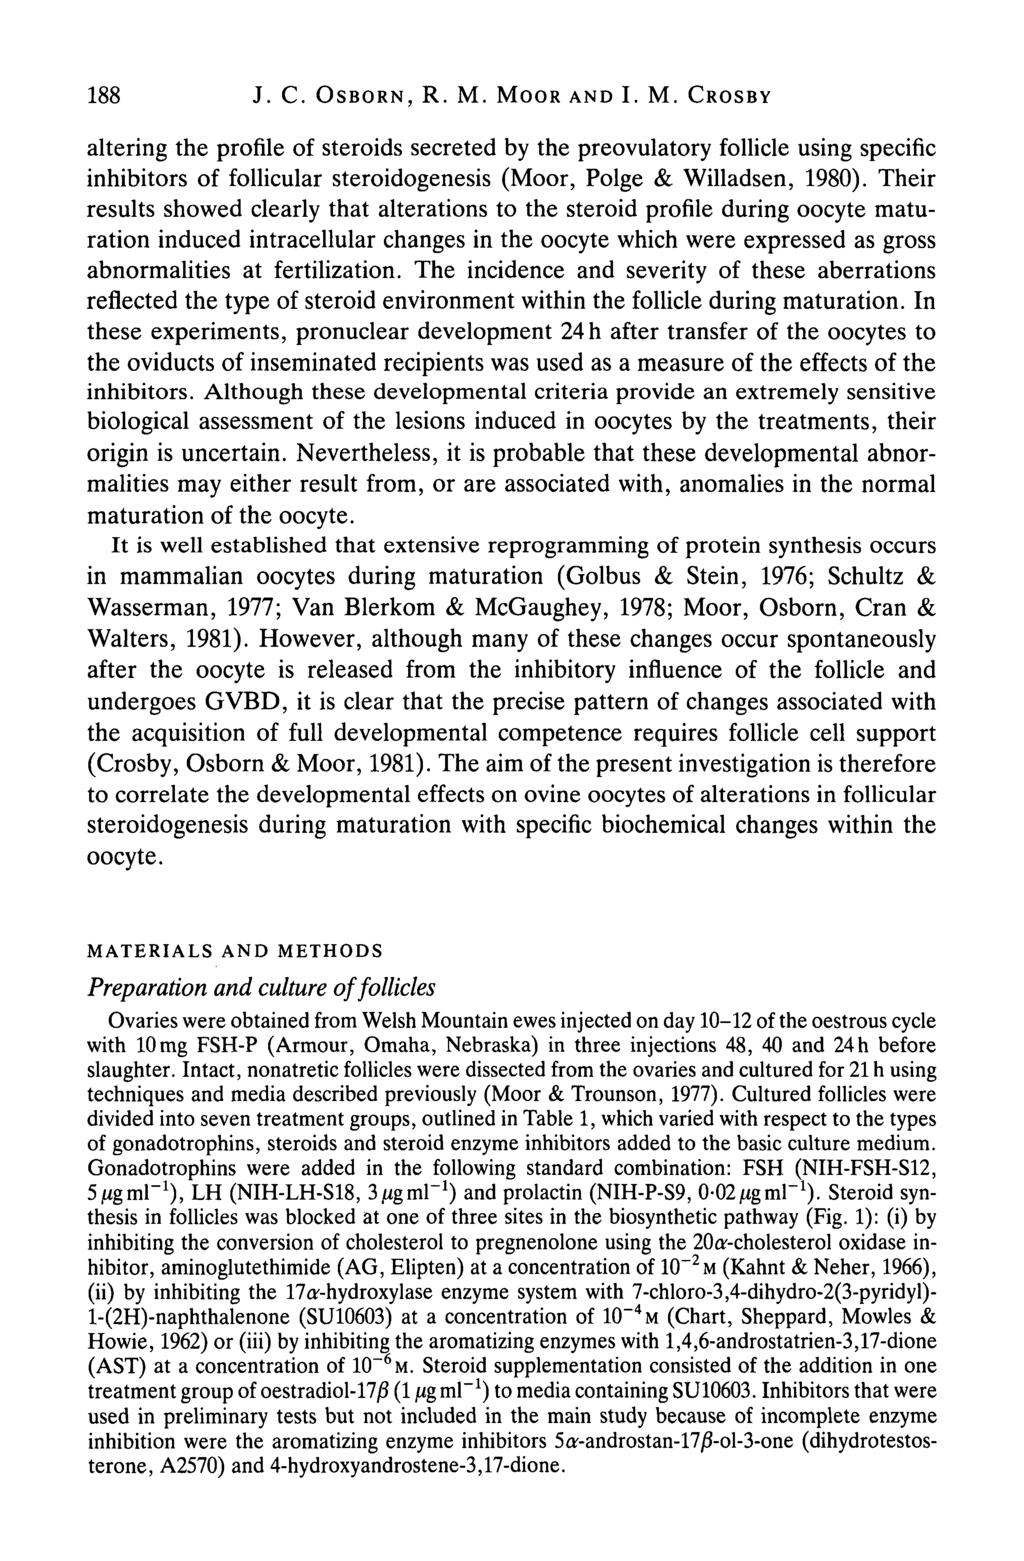 188 J. C. OSBORN, R. M. MOOR AND I. M. CROSBY altering the profile of steroids secreted by the preovulatory follicle using specific inhibitors of follicular steroidogenesis (Moor, Polge & Willadsen, 1980).